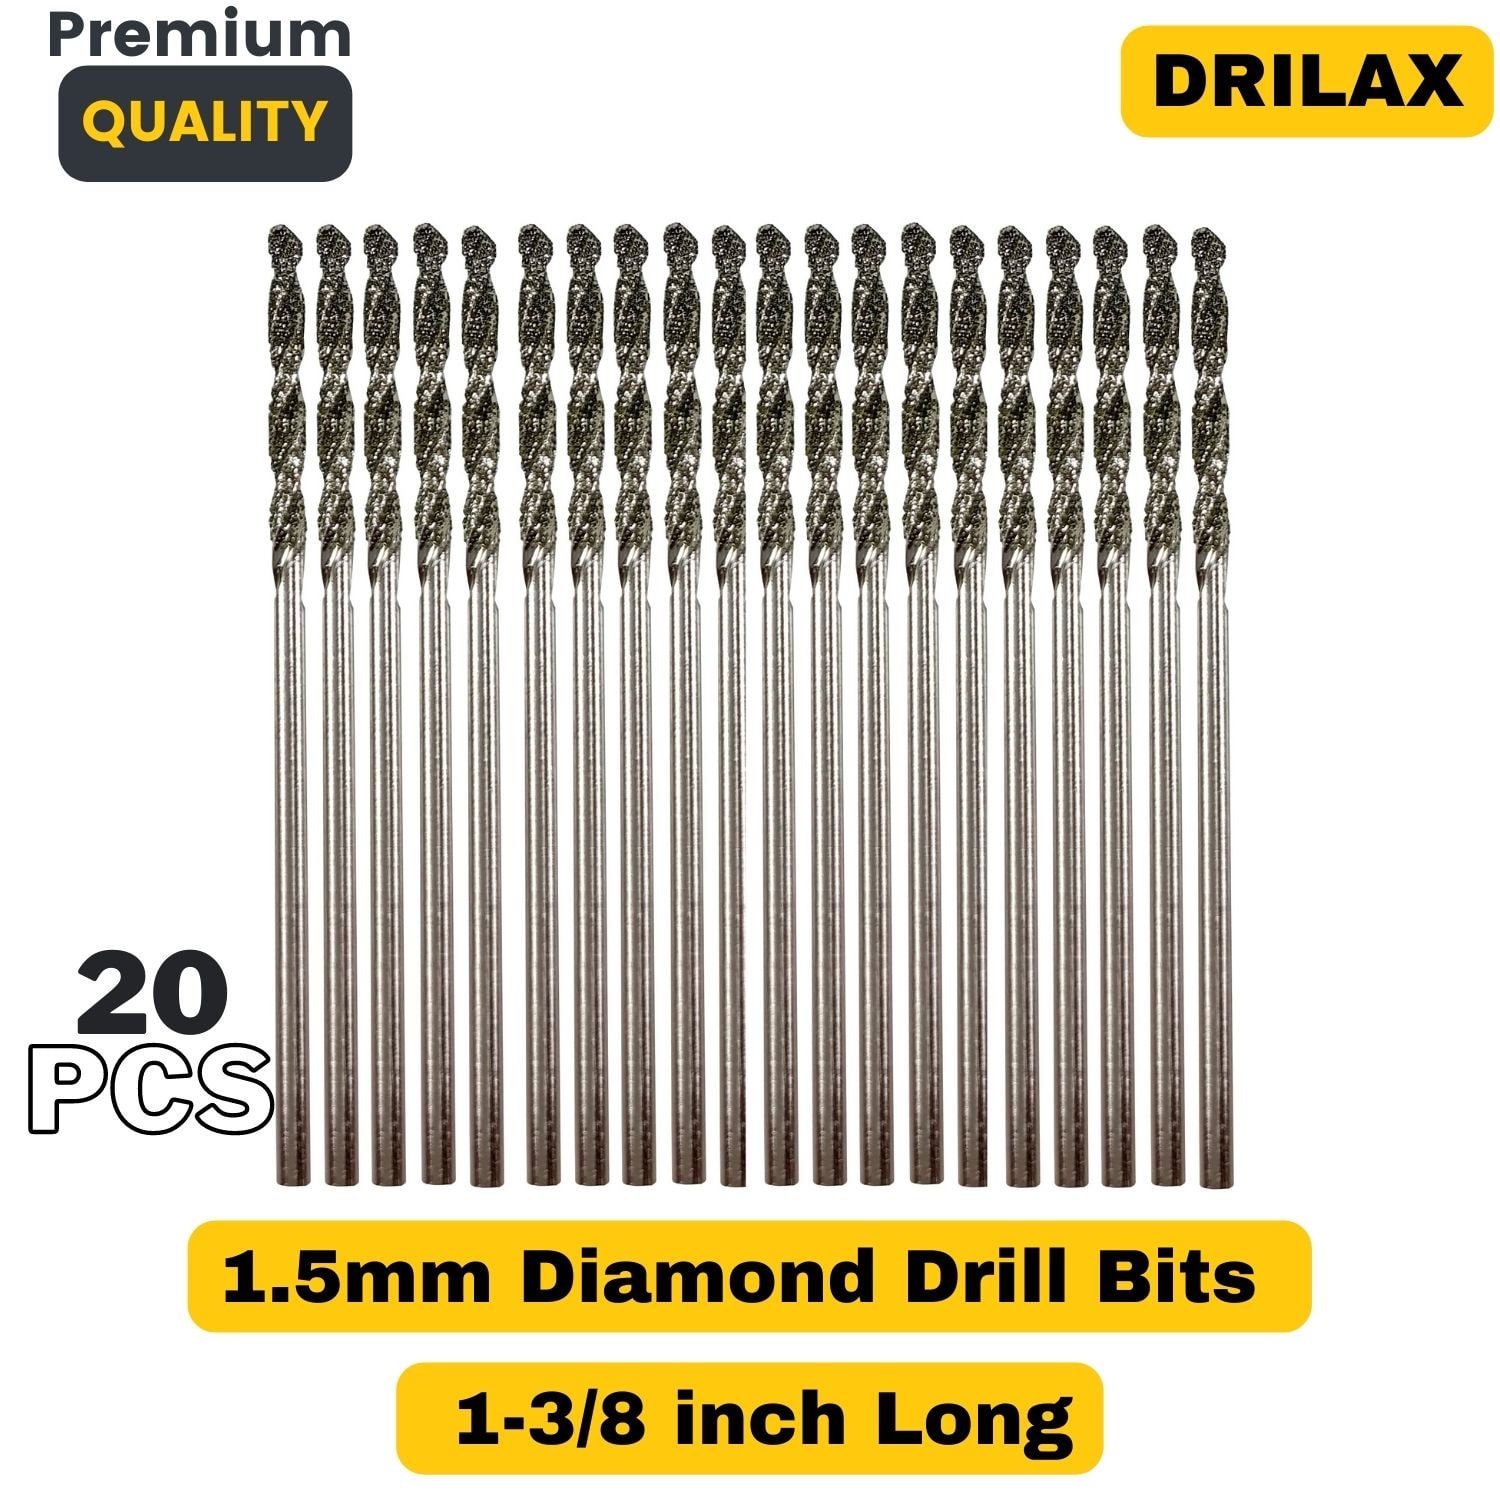 6-piece HSS Manual Drill Set With Handle Jewelry Making Tool DRL-245.06 